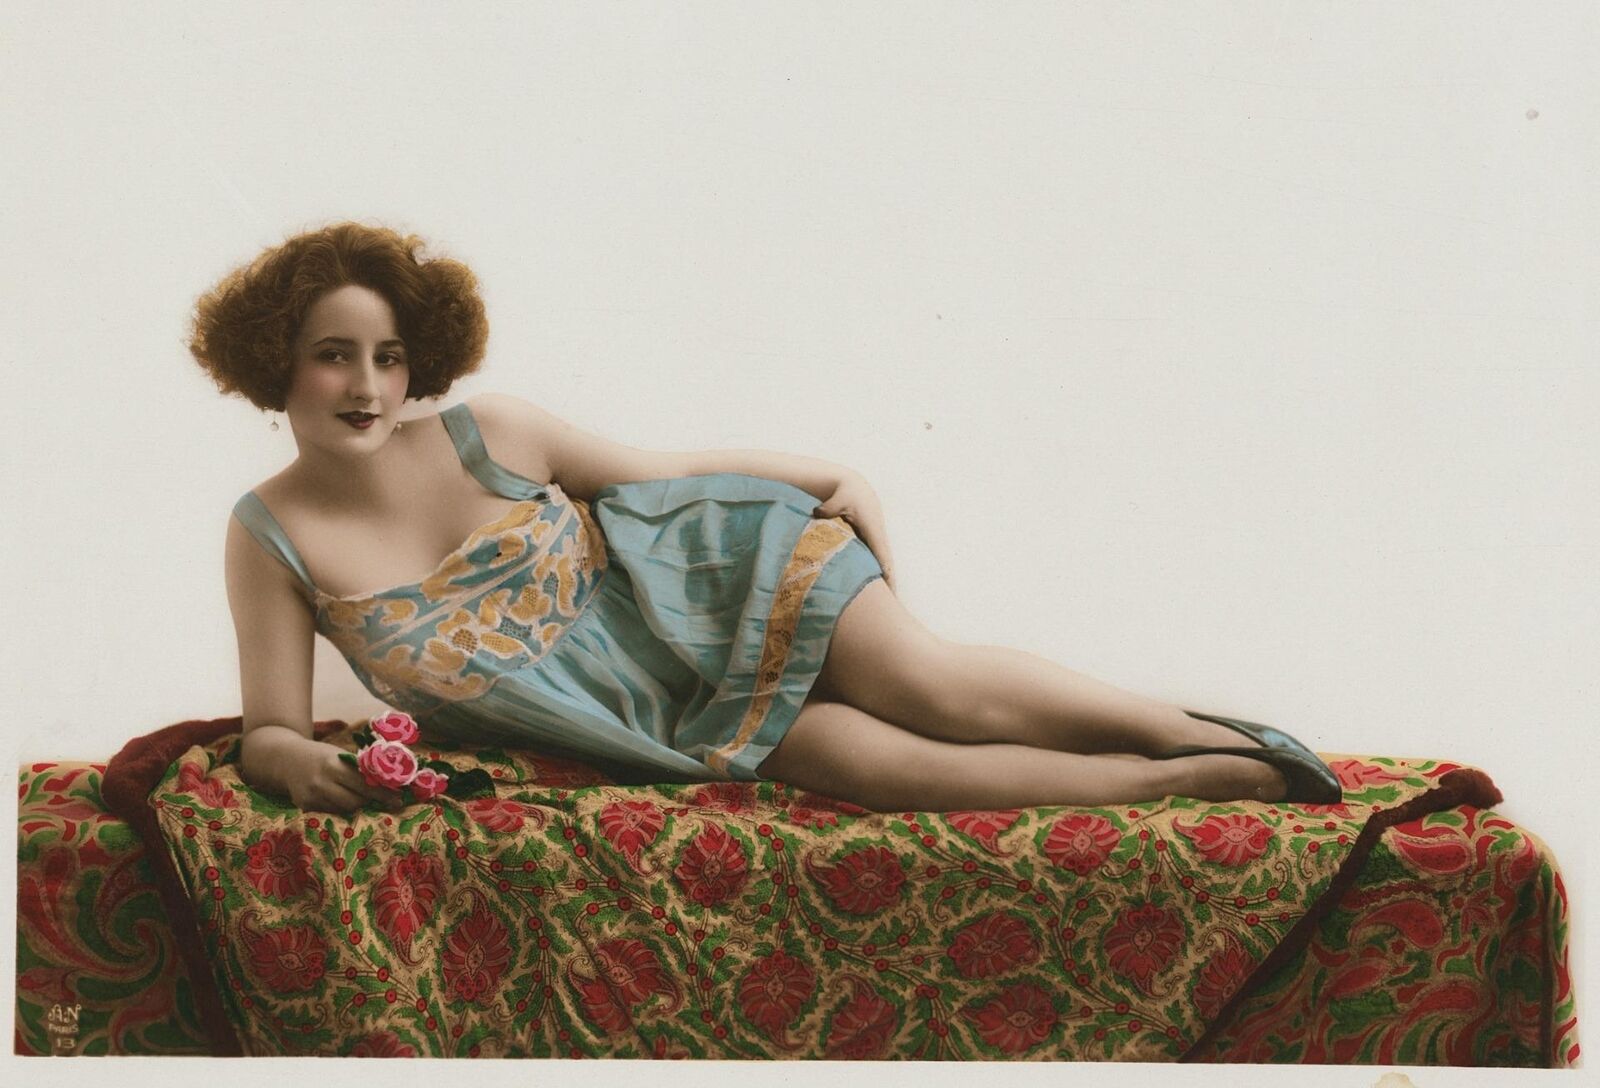 BEAUTIFUL c. 1920's Woman in Lingerie Hand-Colored Photograph